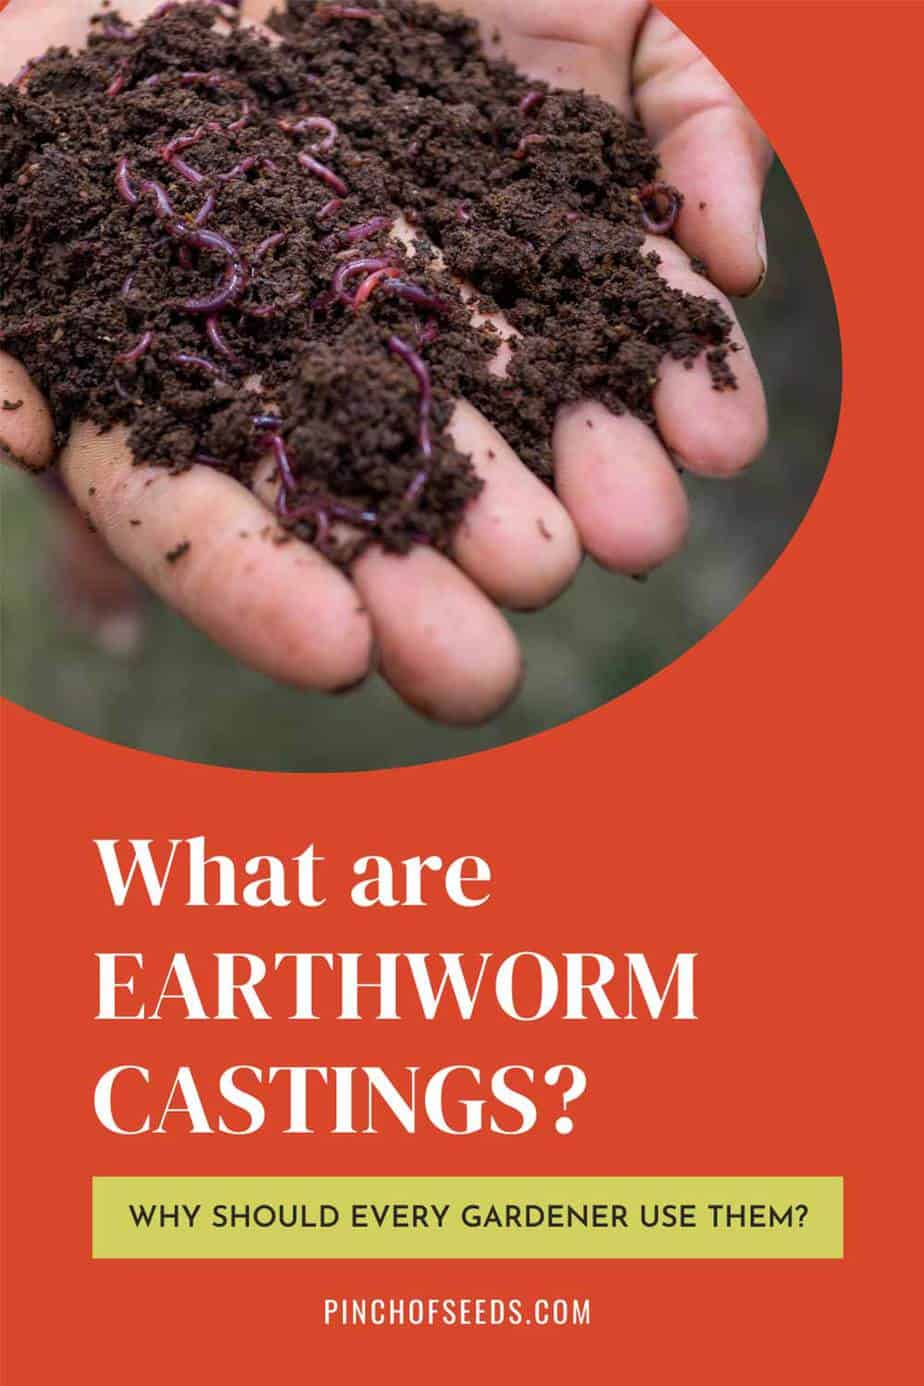 What are earthworm castings?